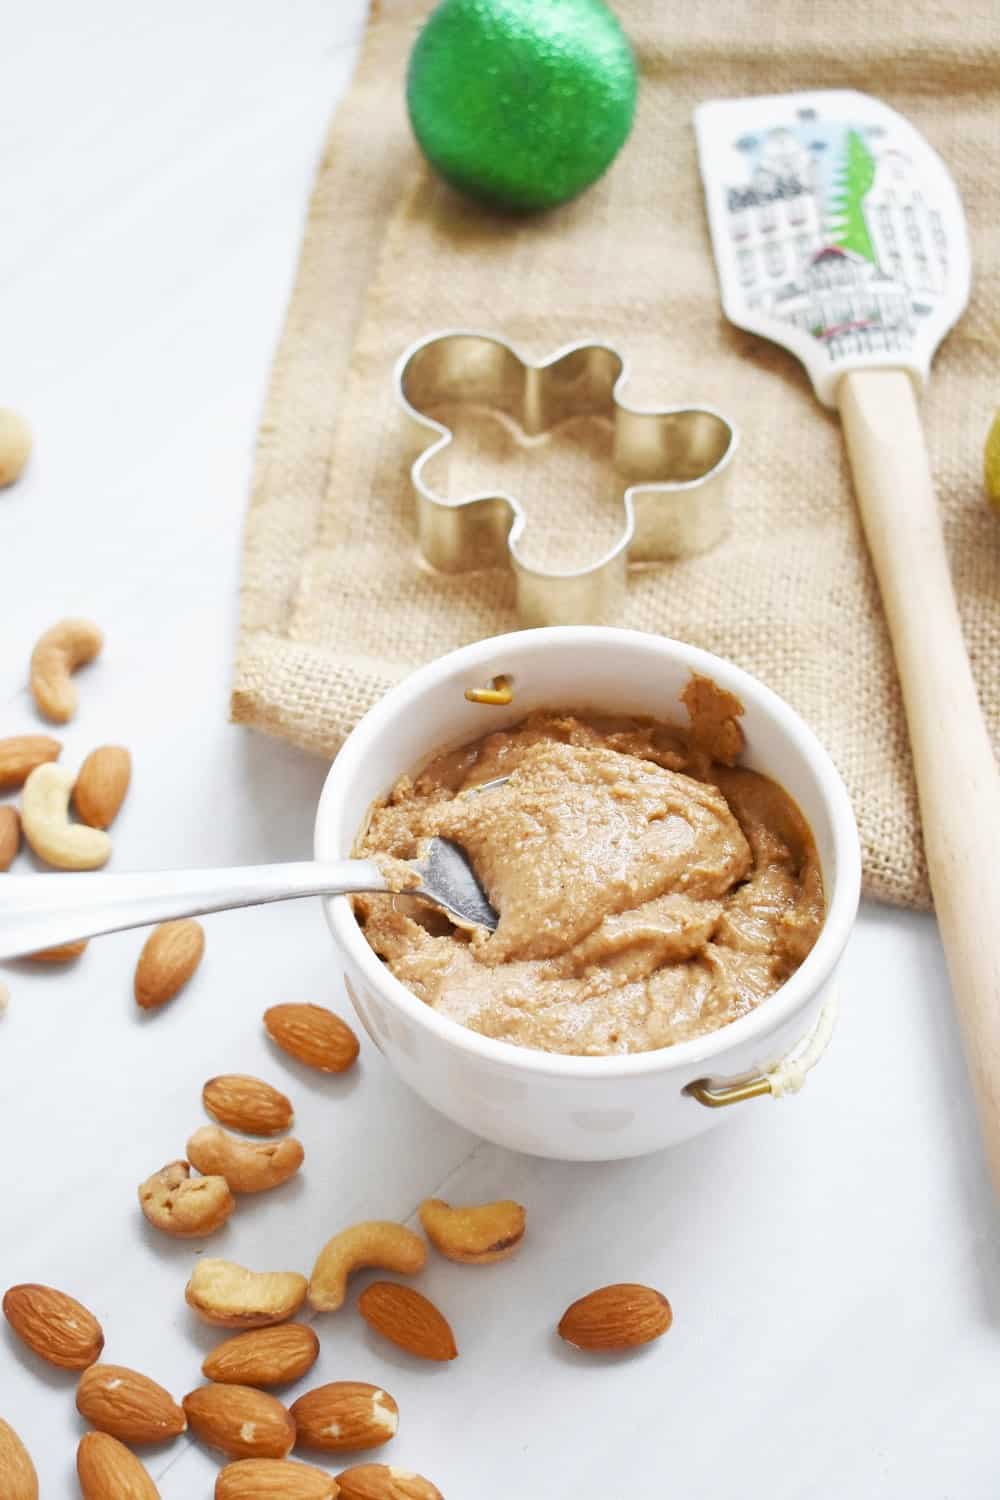 A cup full of homemade gingerbread almond cashew butter next to nuts.